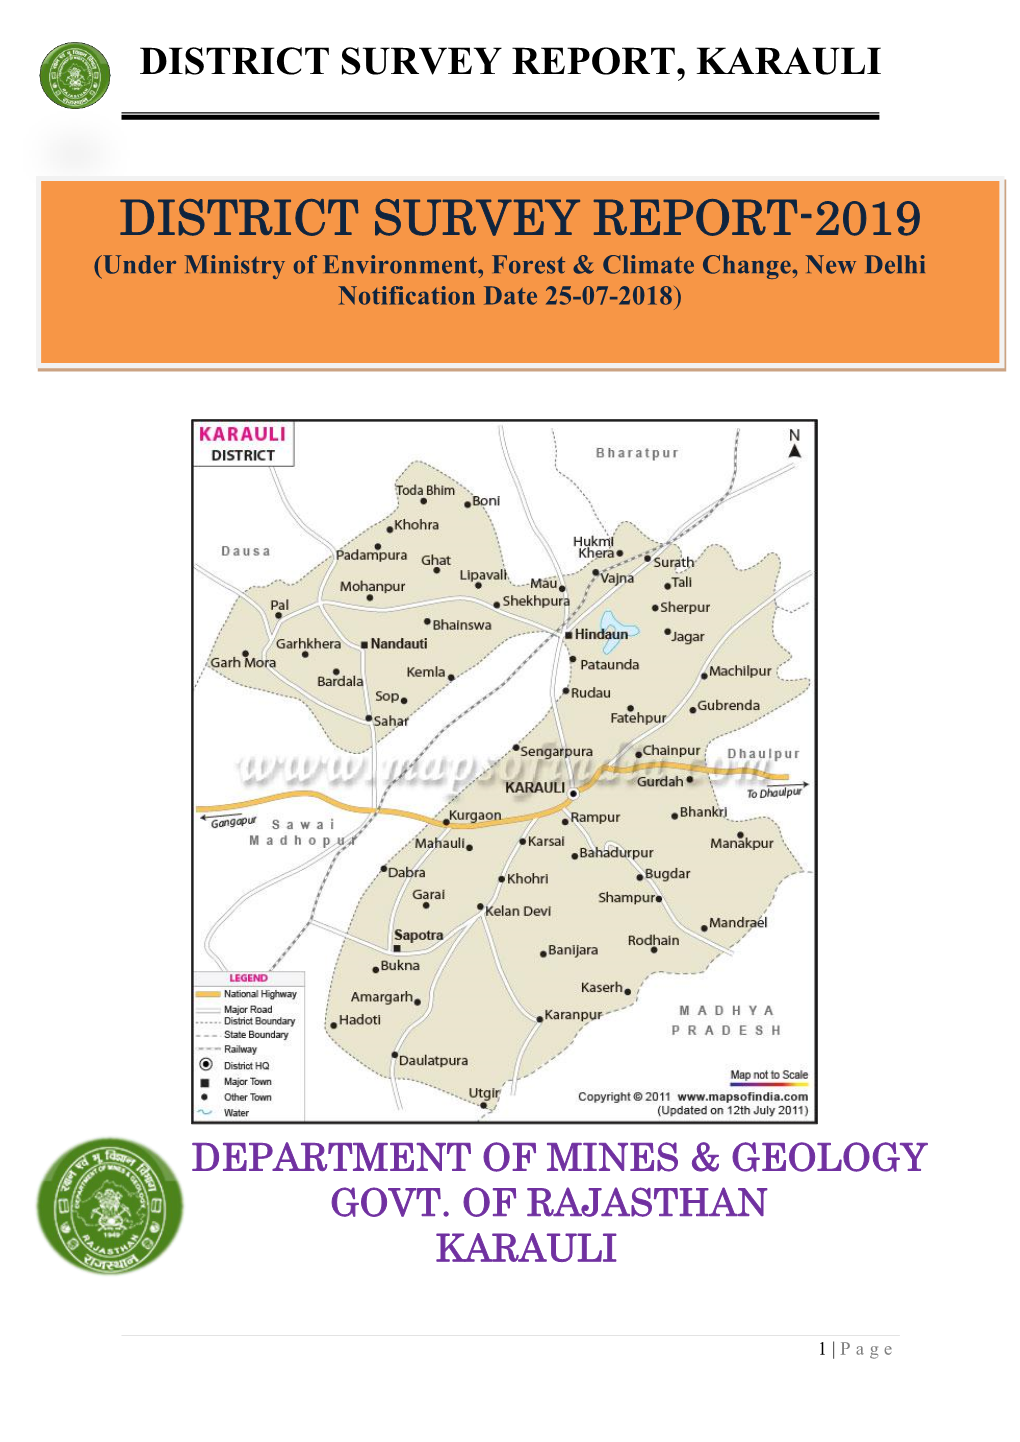 DISTRICT SURVEY REPORT-2019 (Under Ministry of Environment, Forest & Climate Change, New Delhi